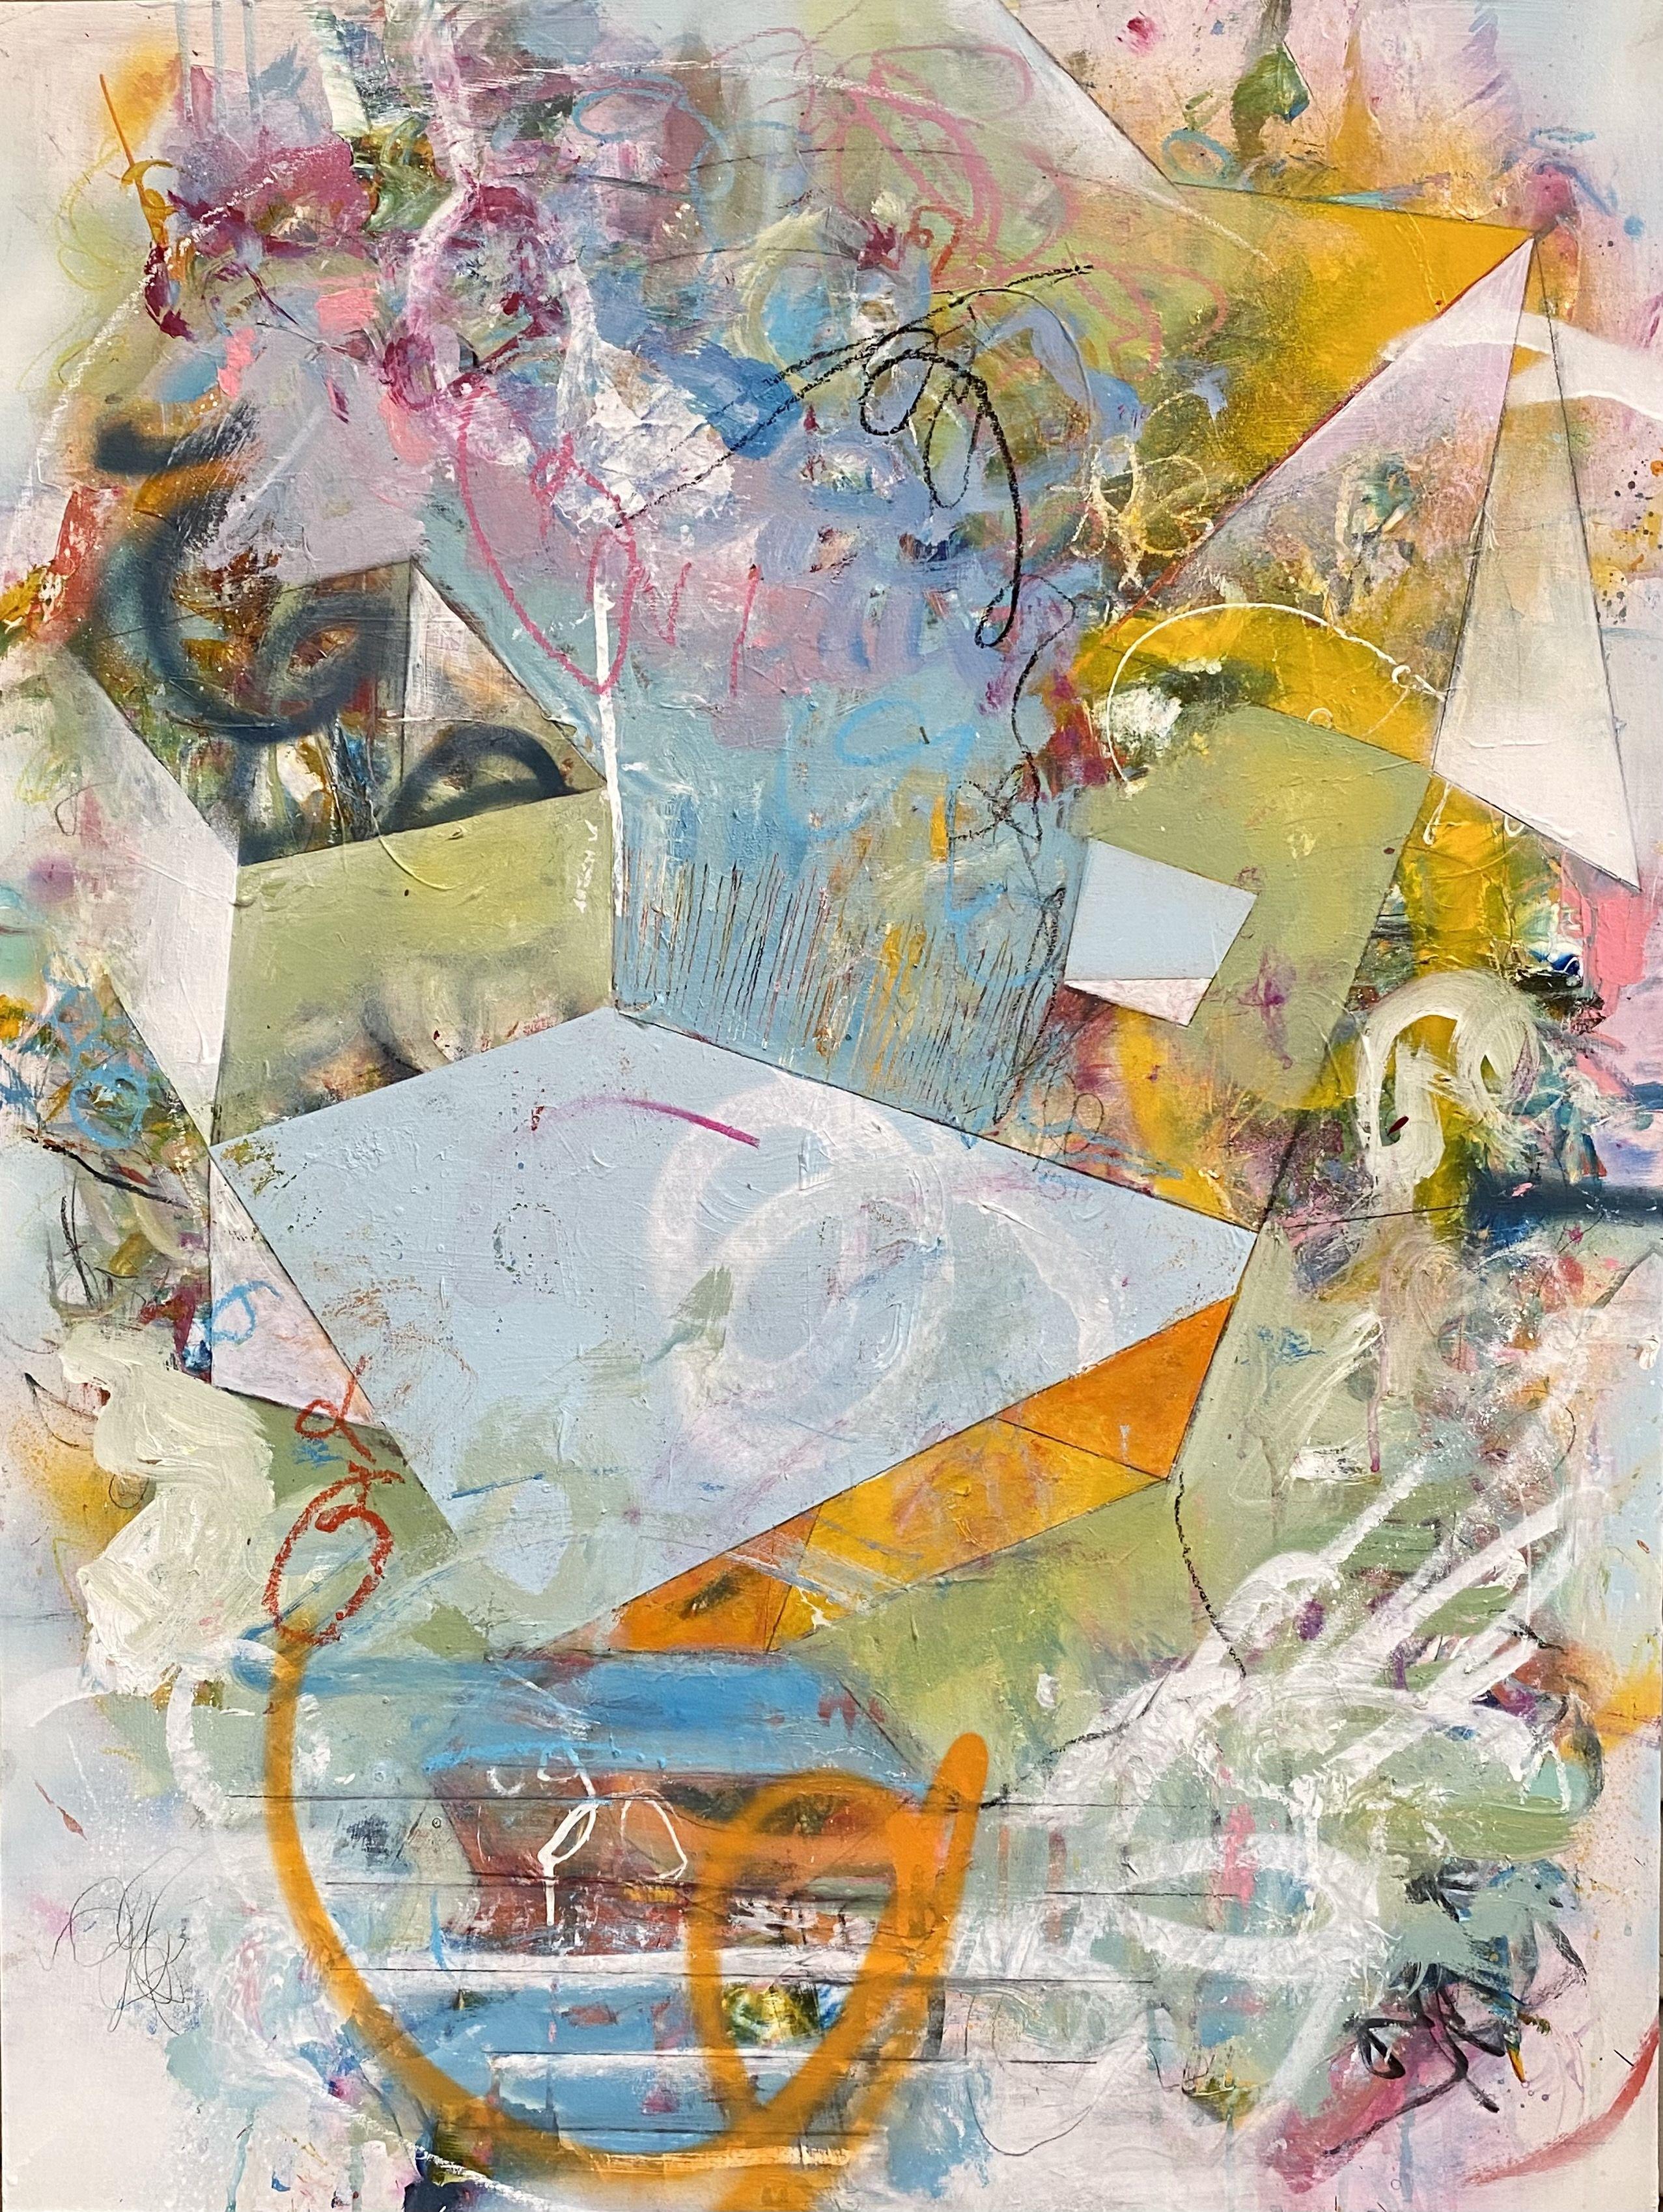 Reminisence & Responses, Mixed Media on Wood Panel - Mixed Media Art by Theresa Vandenberg Donche